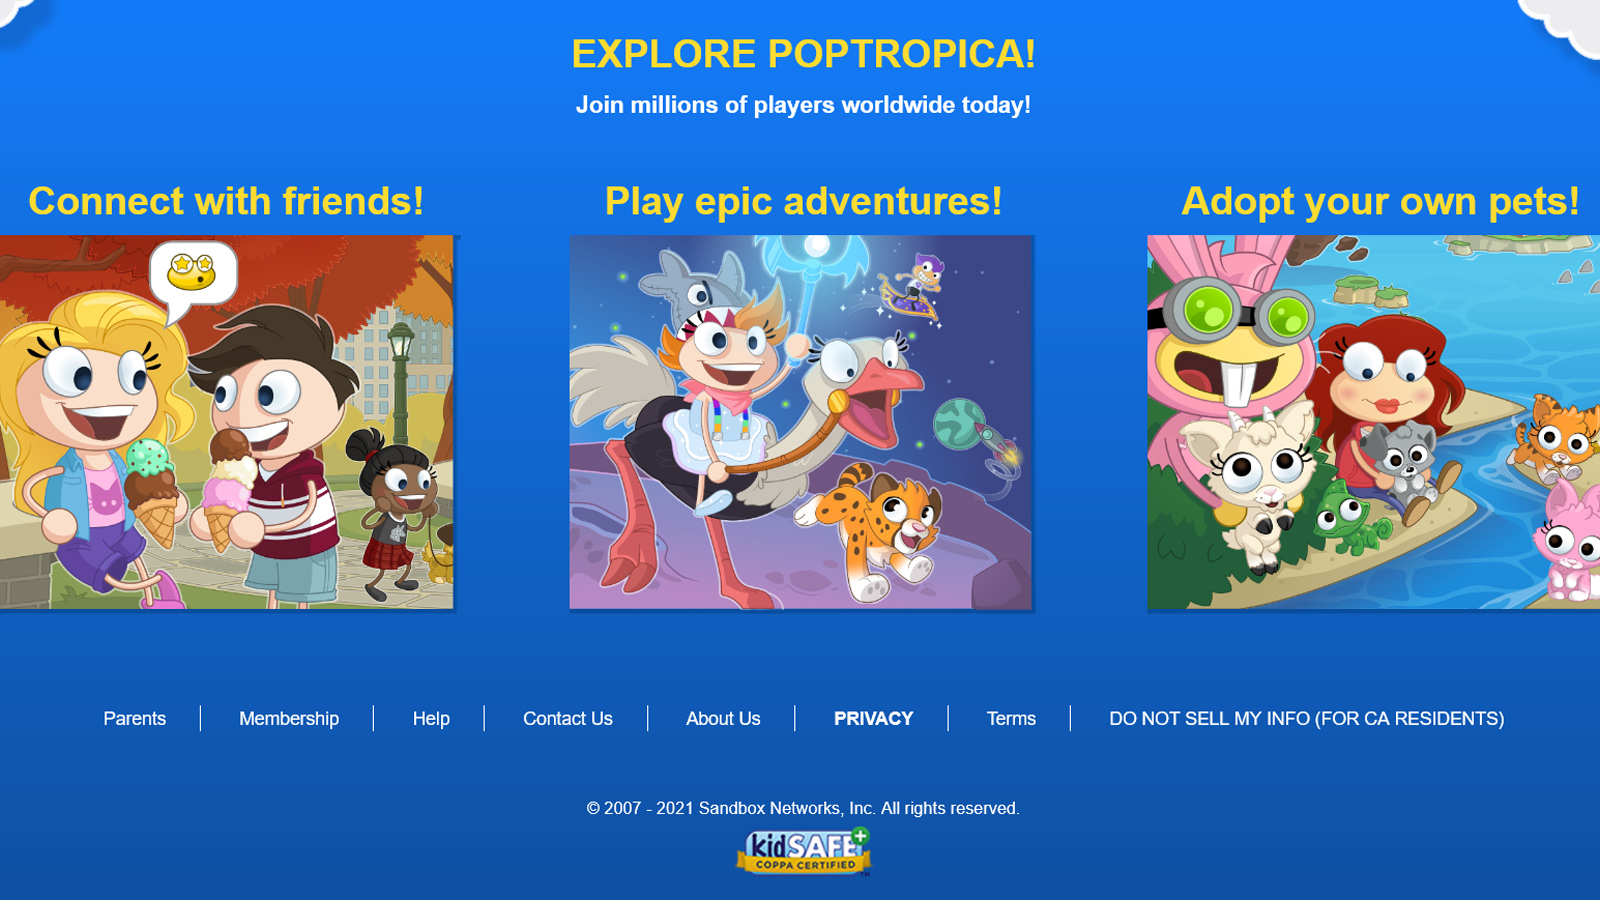 Get feedback from a vast remote working audience about Poptropica